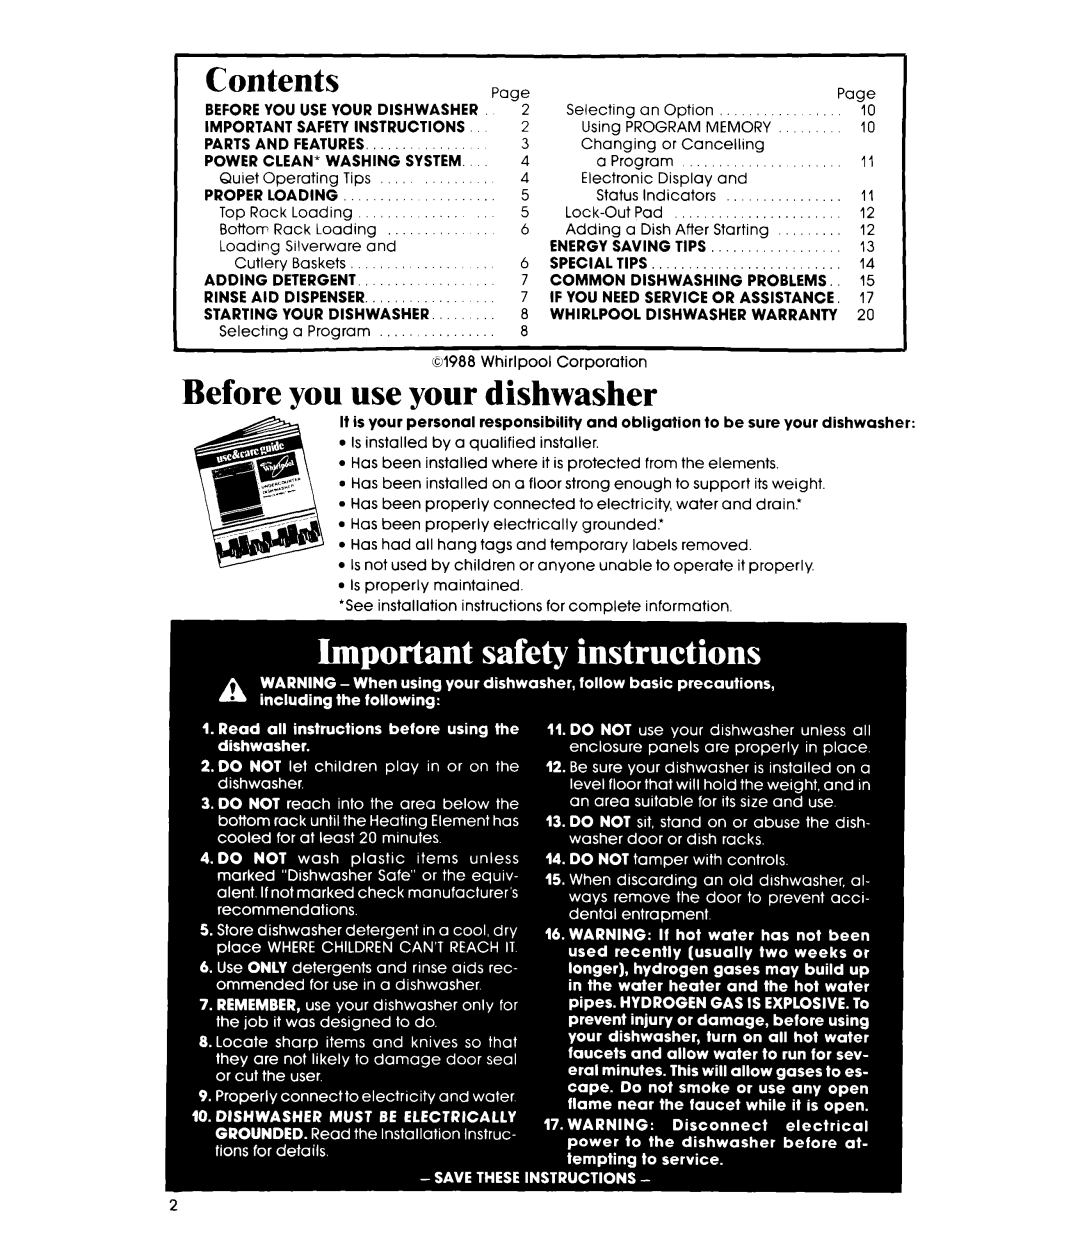 Whirlpool DU9700XT manual Contents, Before you use your dishwasher 